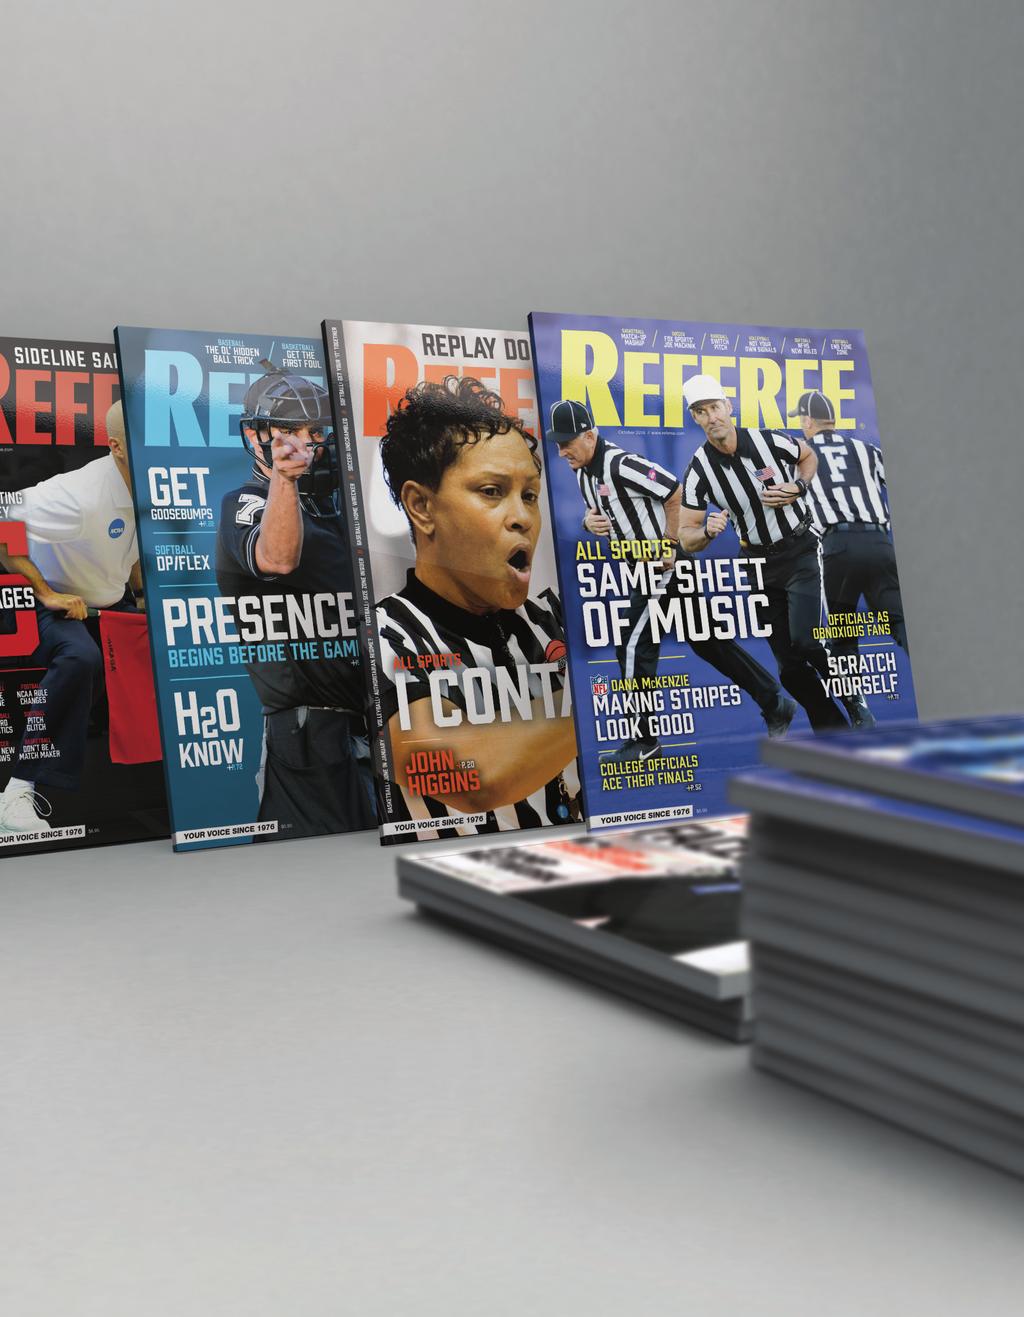 REFEREE MAGAZINE 84 pages every month, focusing on